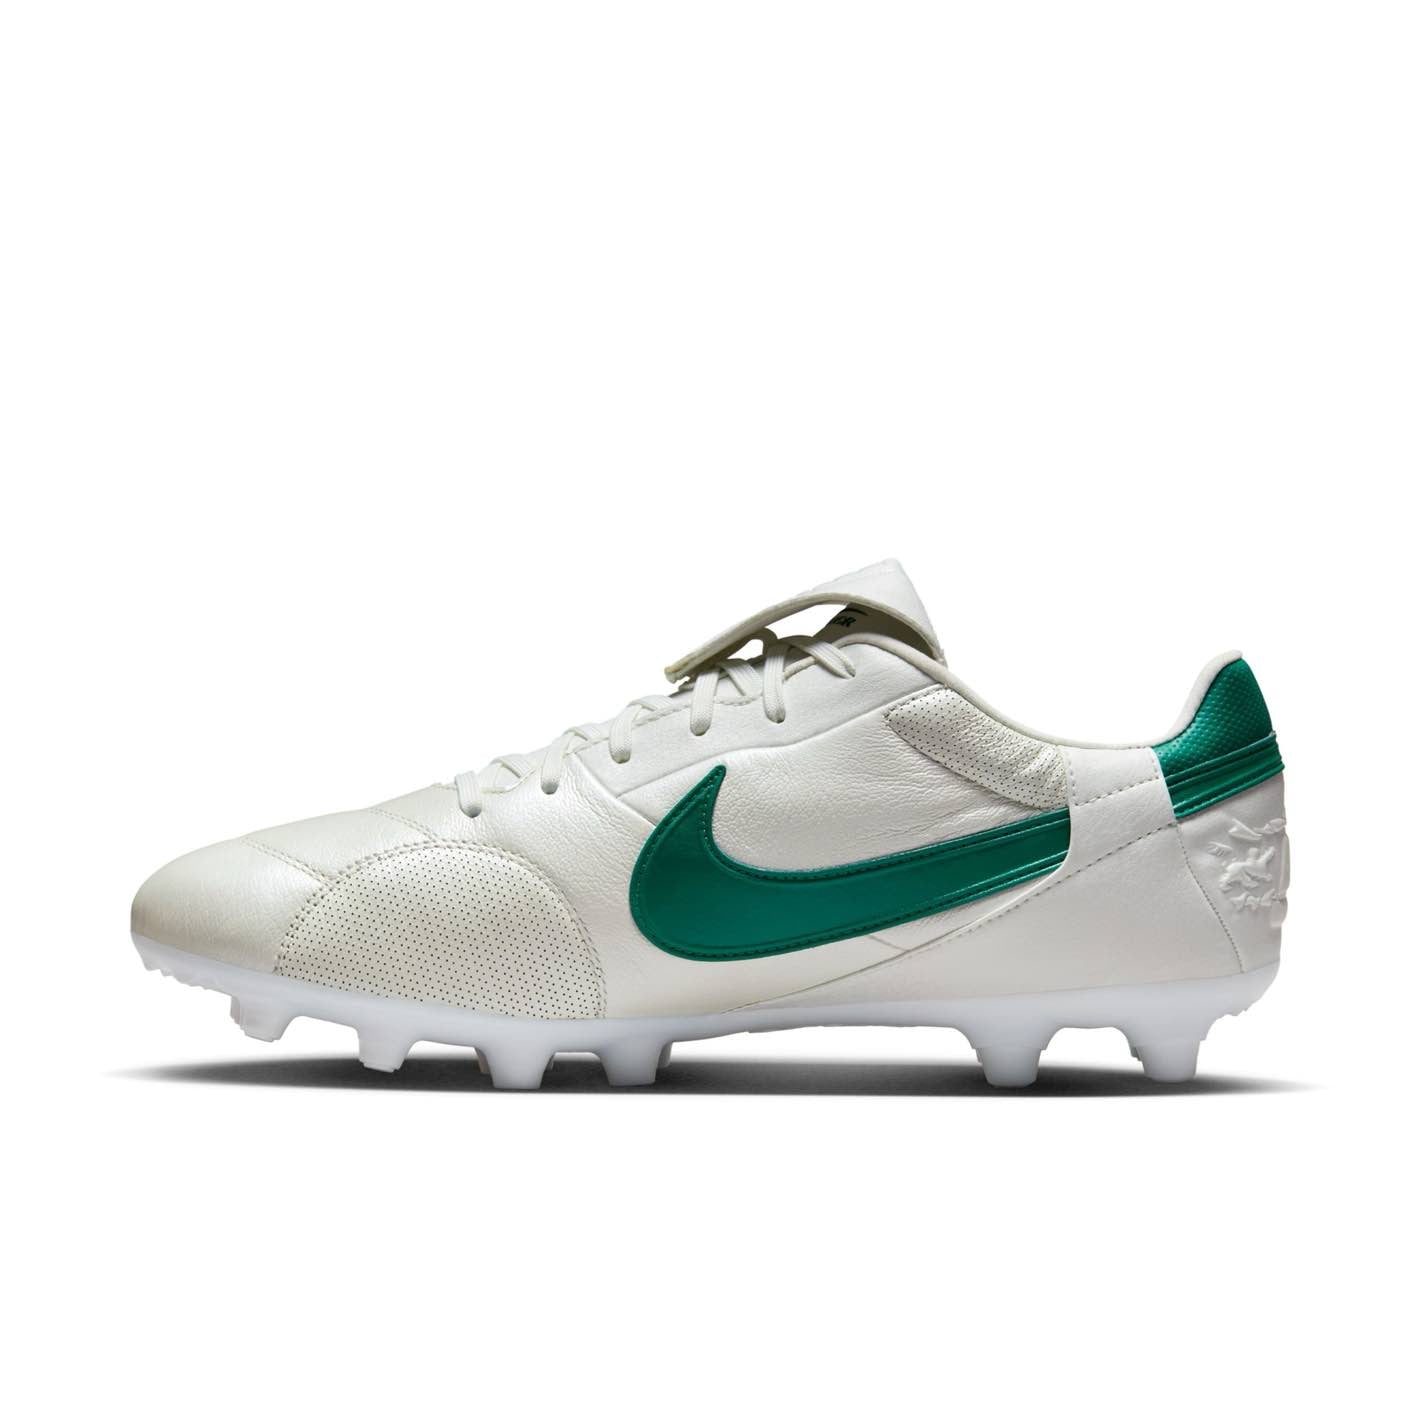 Nike Premier 3 FG Firm-Ground Low-Top Soccer Cleats